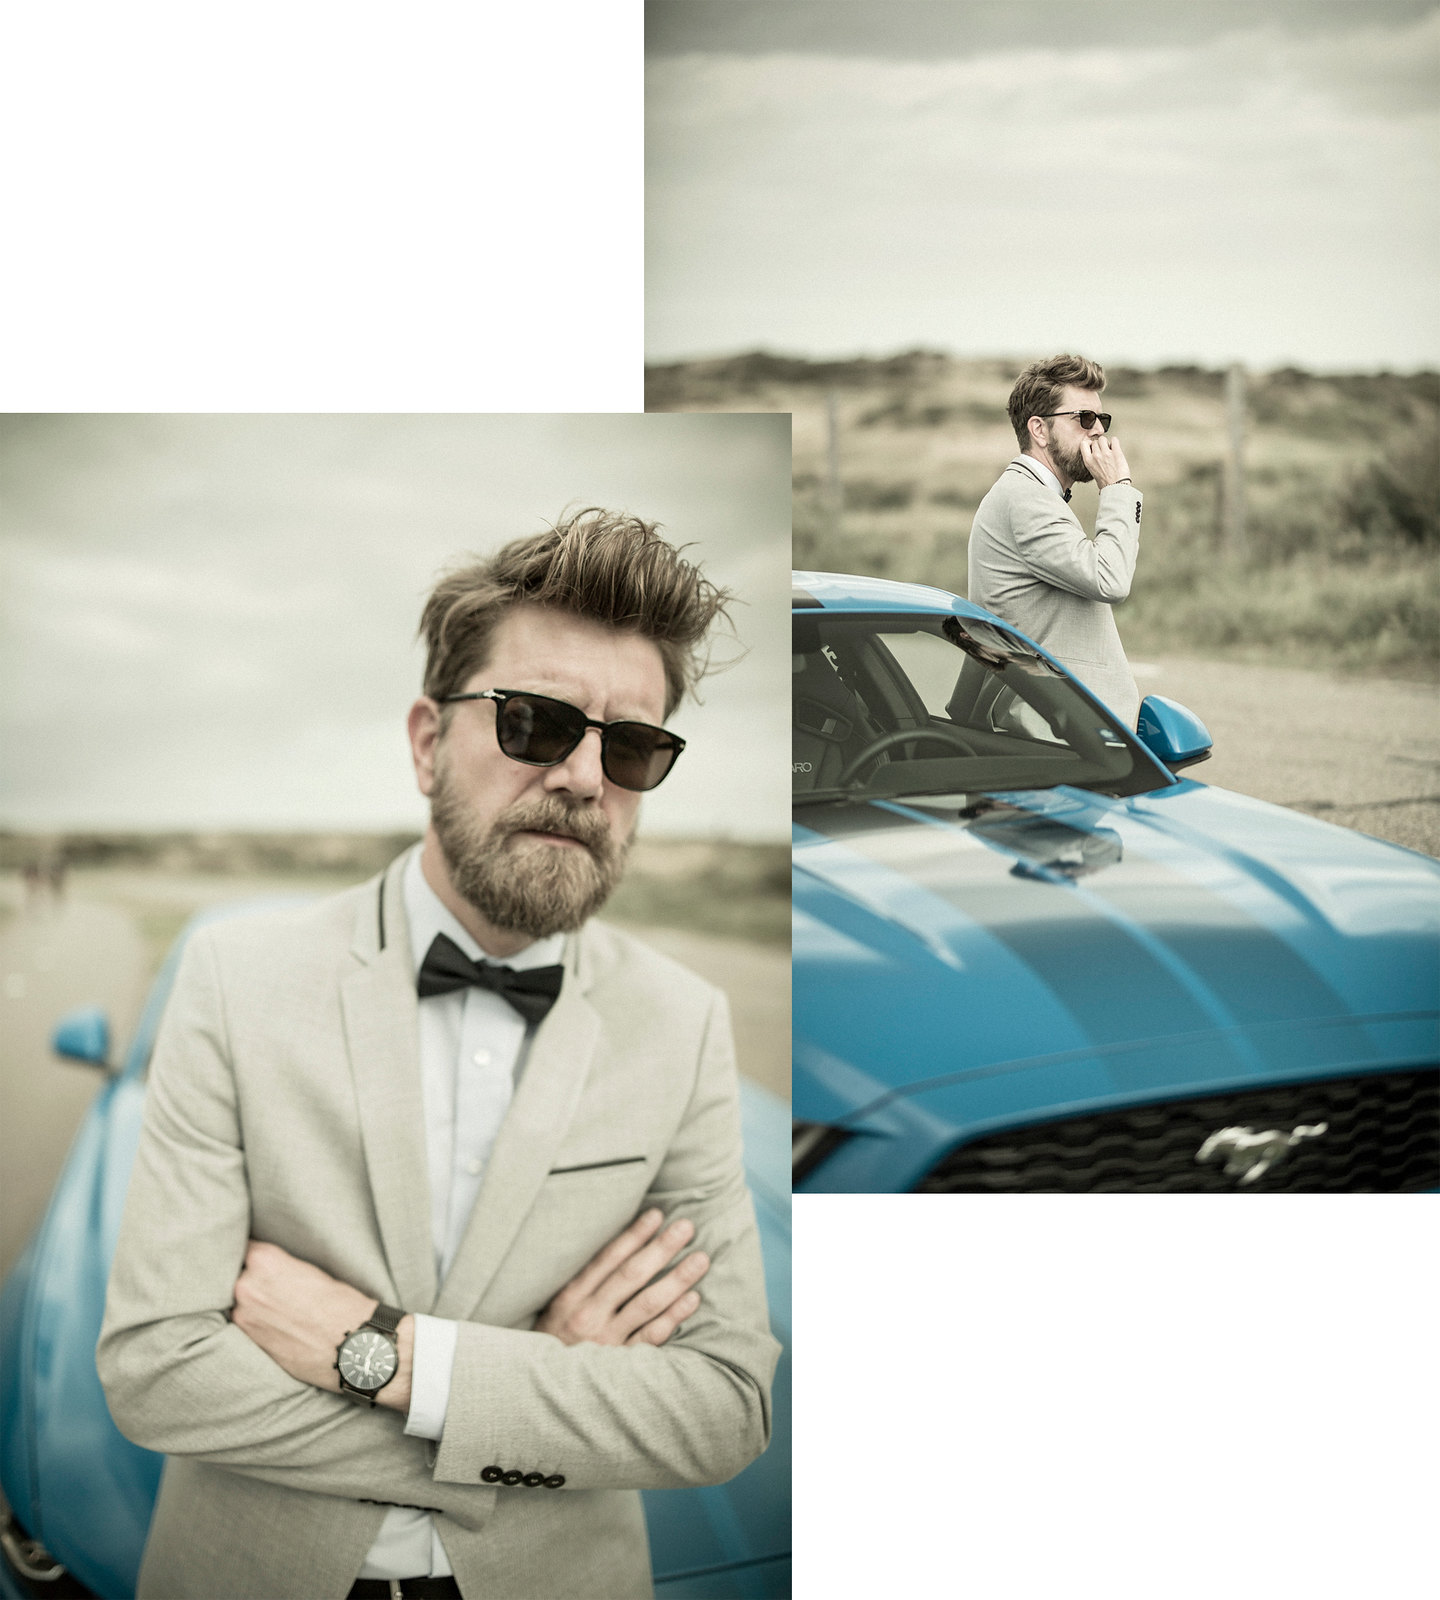 max outfit lookbook dandy chic gentleman modern style grey suit zaraman dapper persol sunglasses chic going out wedding ford mustang pony car max bechmann fotografie film düsseldorf nrw germany germanblogger maleblogger männerstyle modeblog cats & dogs 1